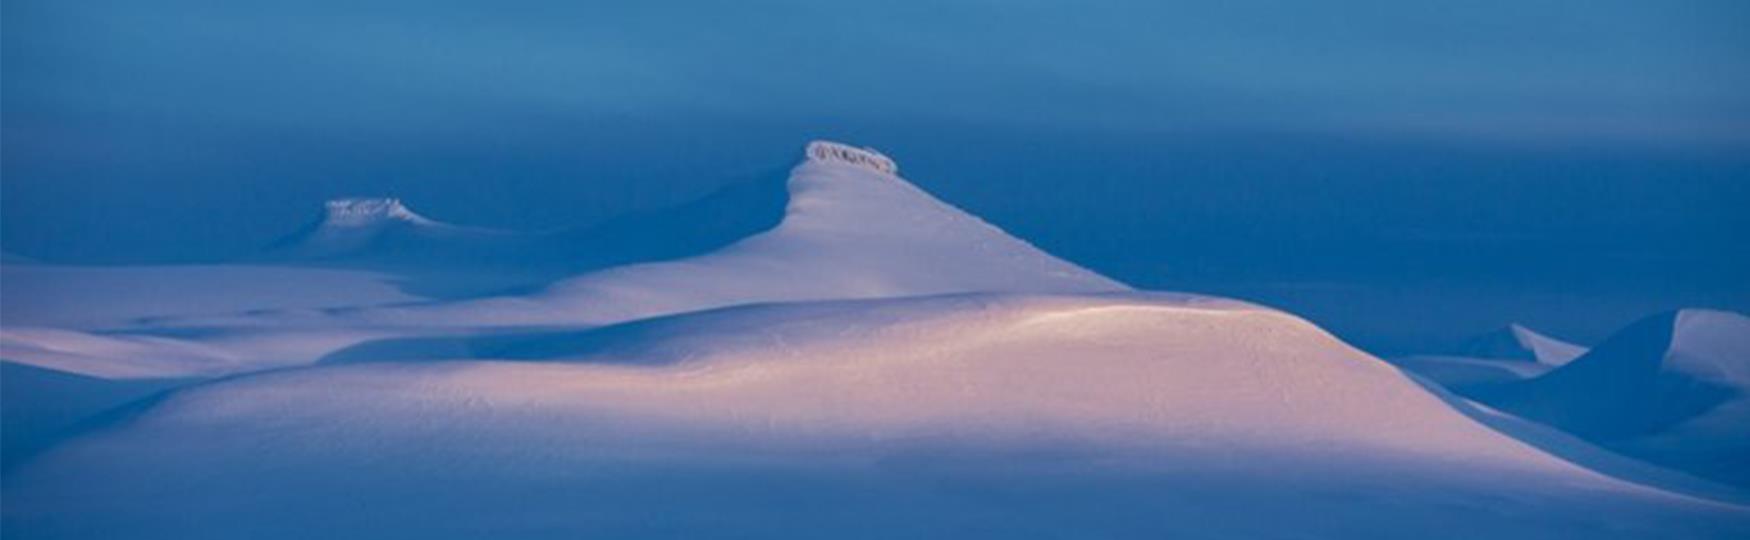 Discover Svalbard